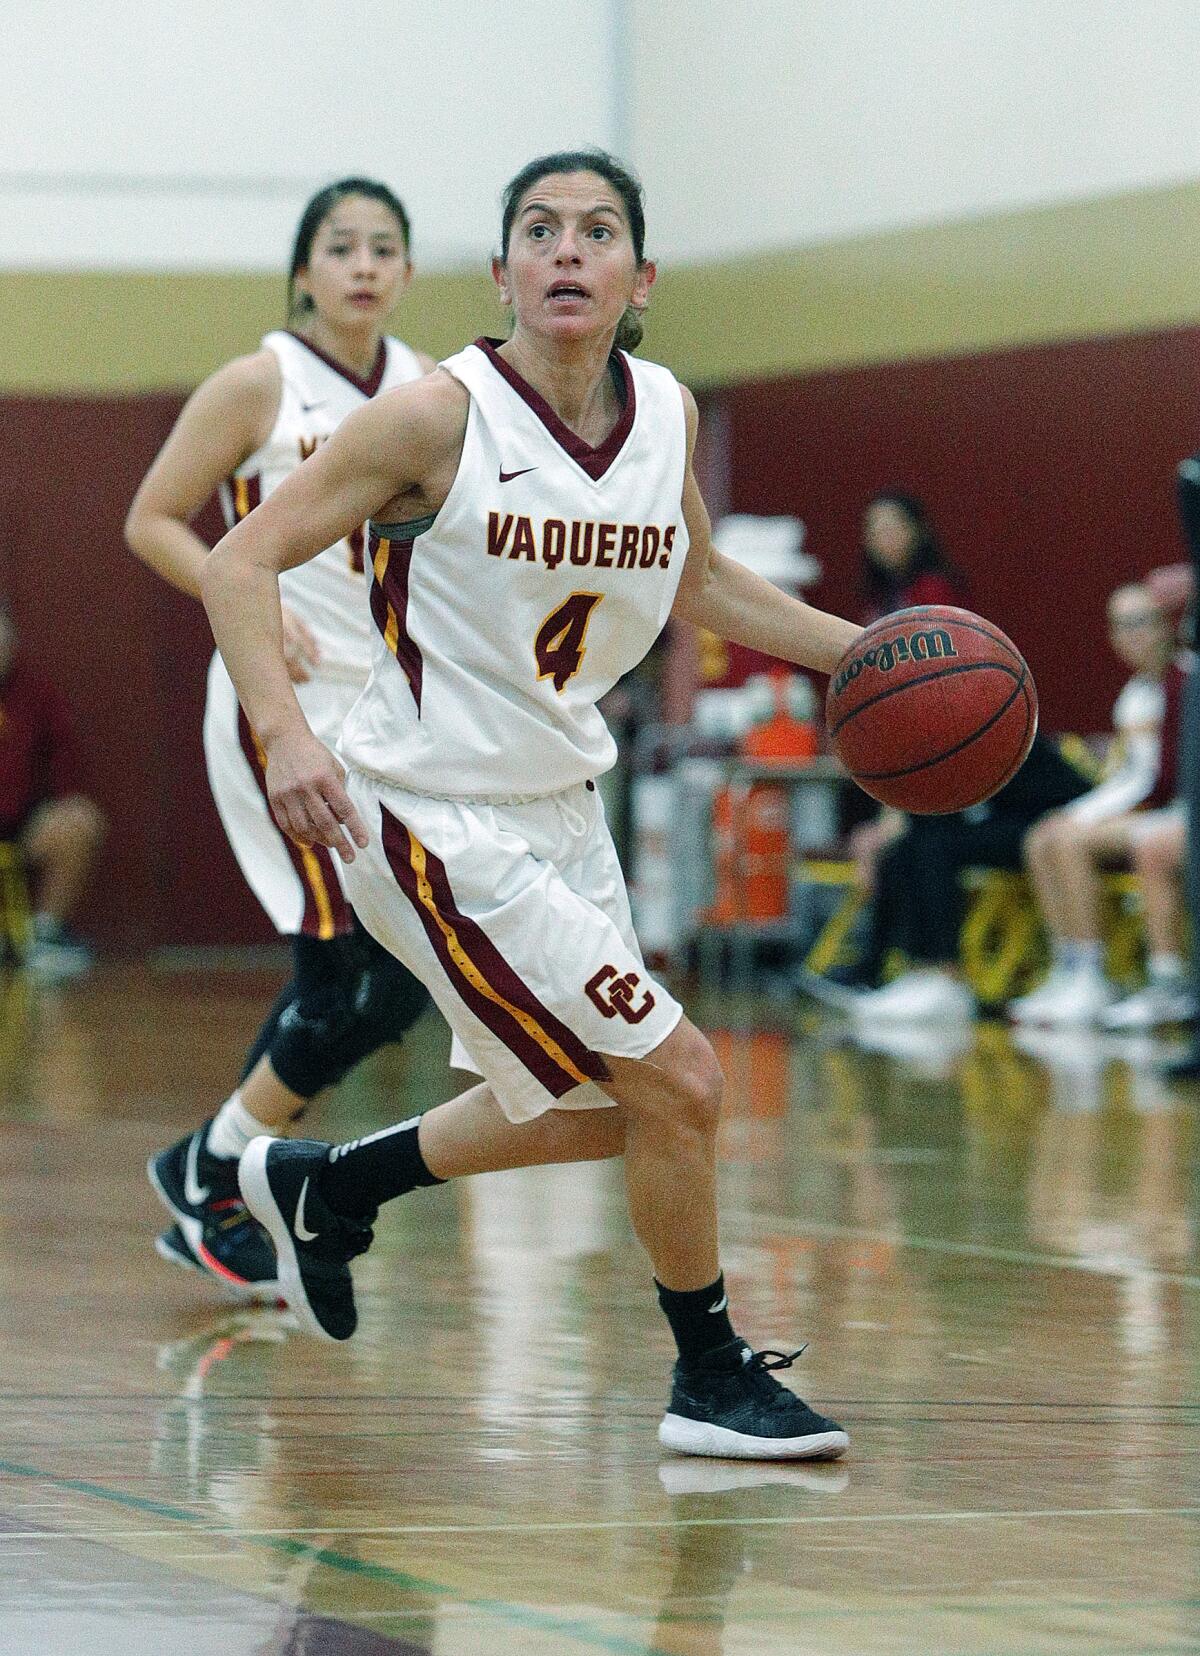 Glendale Community College's Vicky Oganyan checks for a shot while dribbling outside the three-point circle in a women's basketball game against Allan Hancock in the annual Vaquero basketball tournament at Glendale Community College on Wednesday, December 18, 2019. Oganyan is the long-time head coach of the Burroughs High School girls' basketball team and is playing for GCC while taking classes at GCC. Glendale won the game to improve to 10-1 on the season by defeating Allan Hancock 58-50.